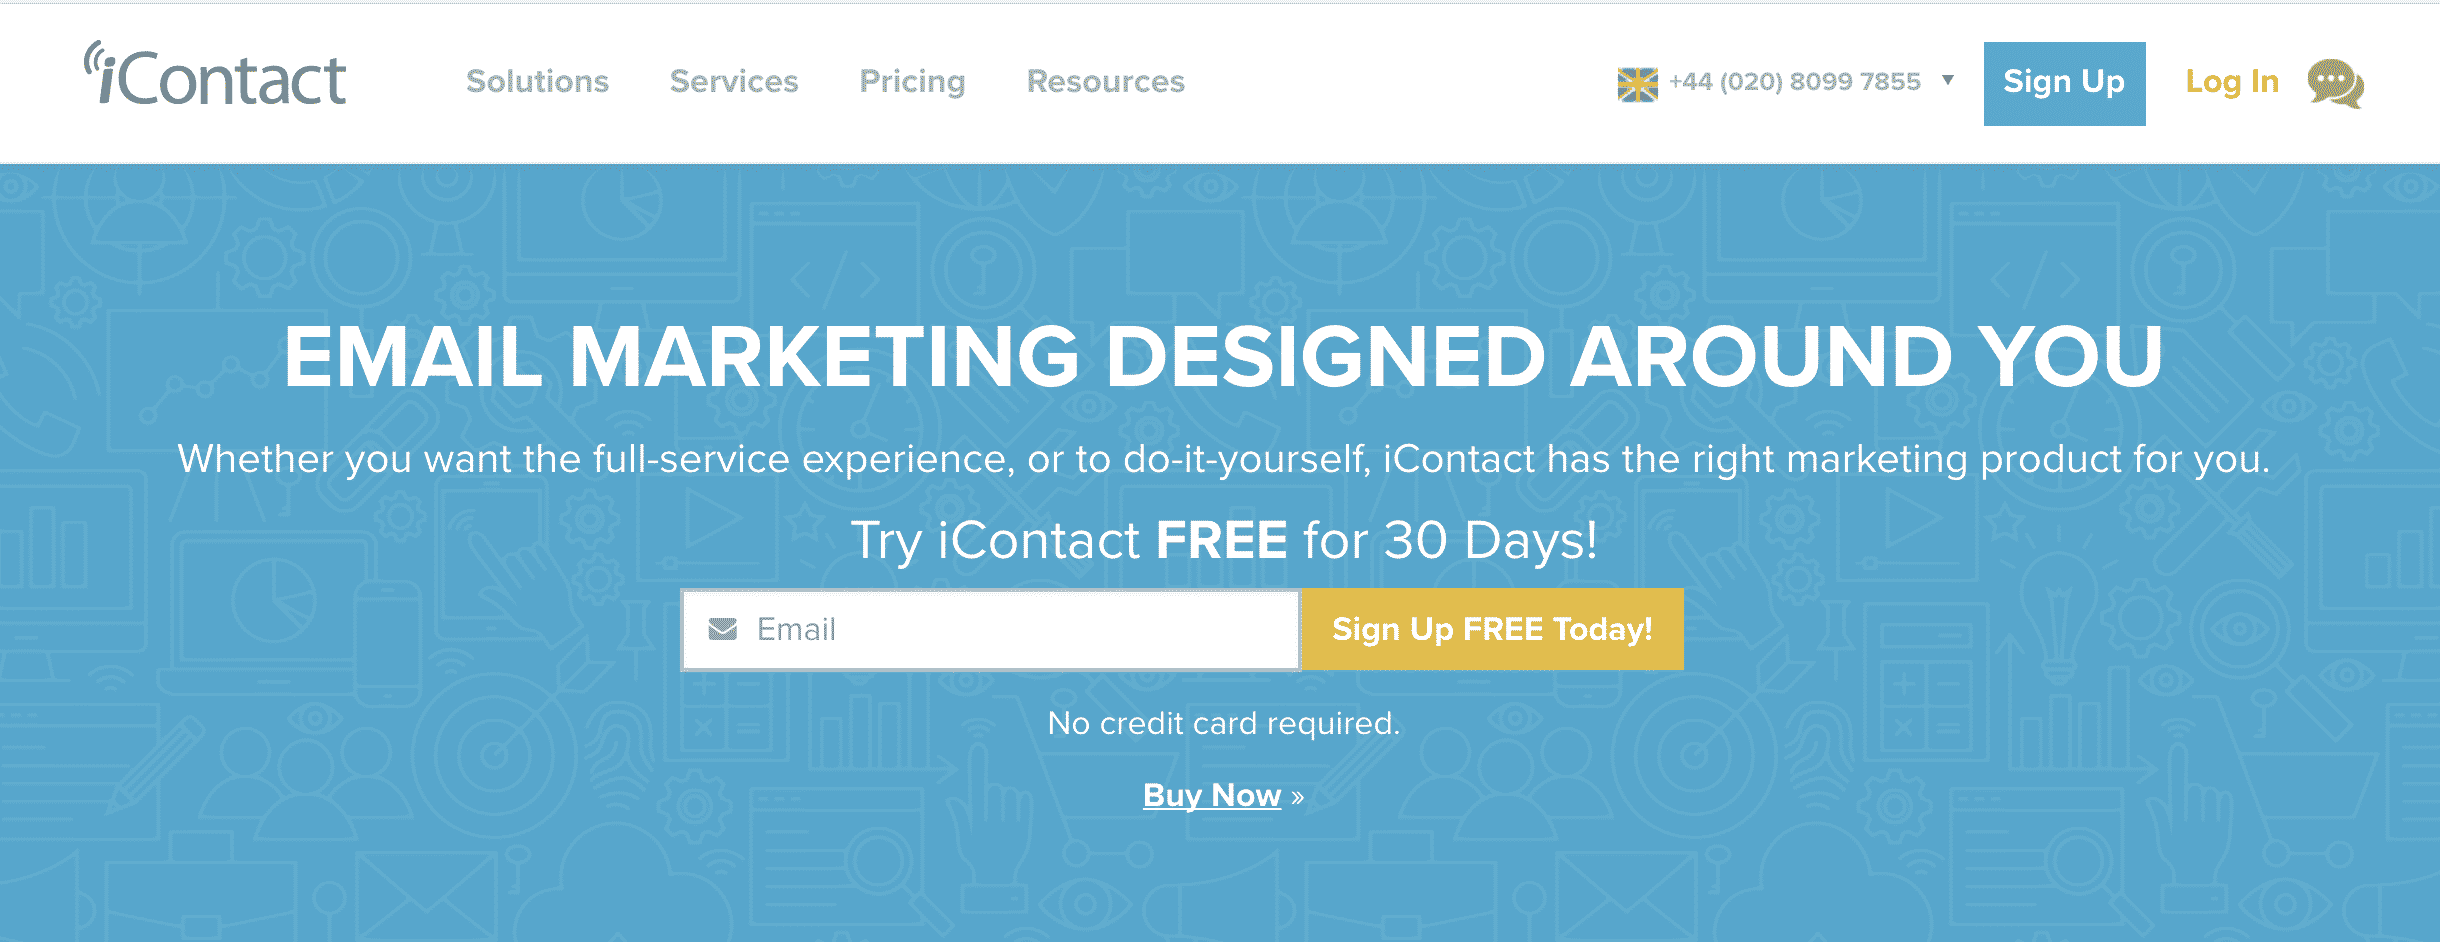 iContact Email Marketing